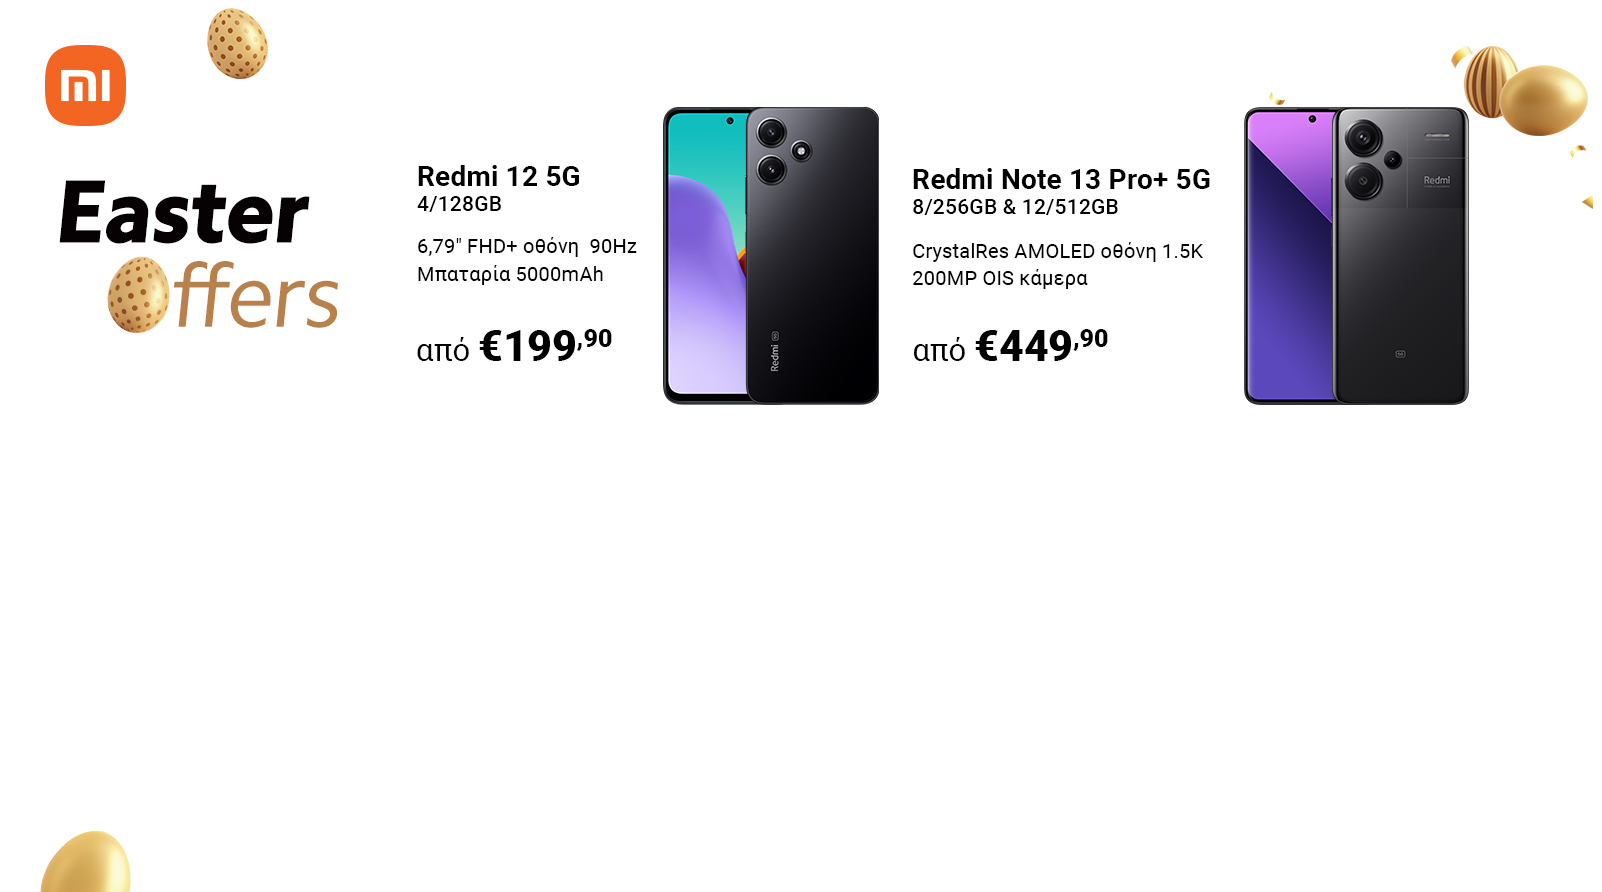 Xiaomi Easter Offers